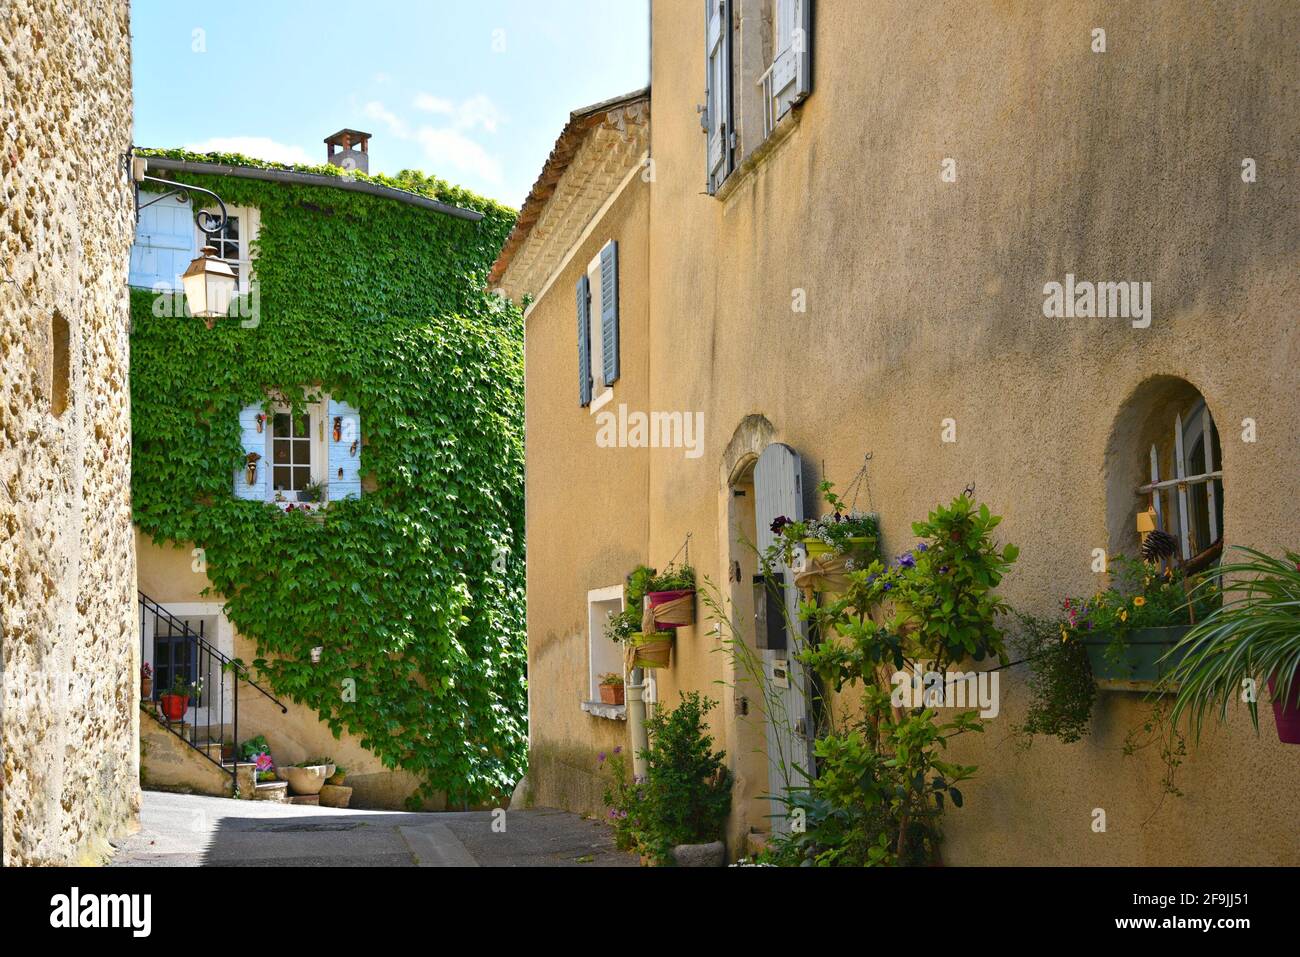 Typical Provençal style architecture in the picturesque village of Lourmarin in Vaucluse, Provence France. Stock Photo